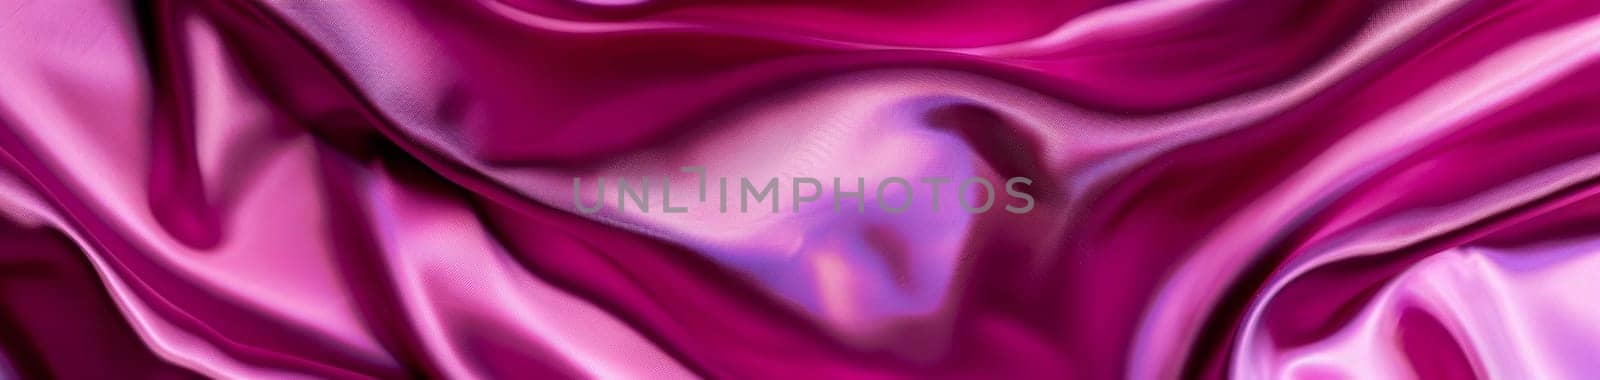 Sumptuous waves of magenta silk flow across the image, their glossy surface reflecting elegance and a tactile sensibility. by sfinks